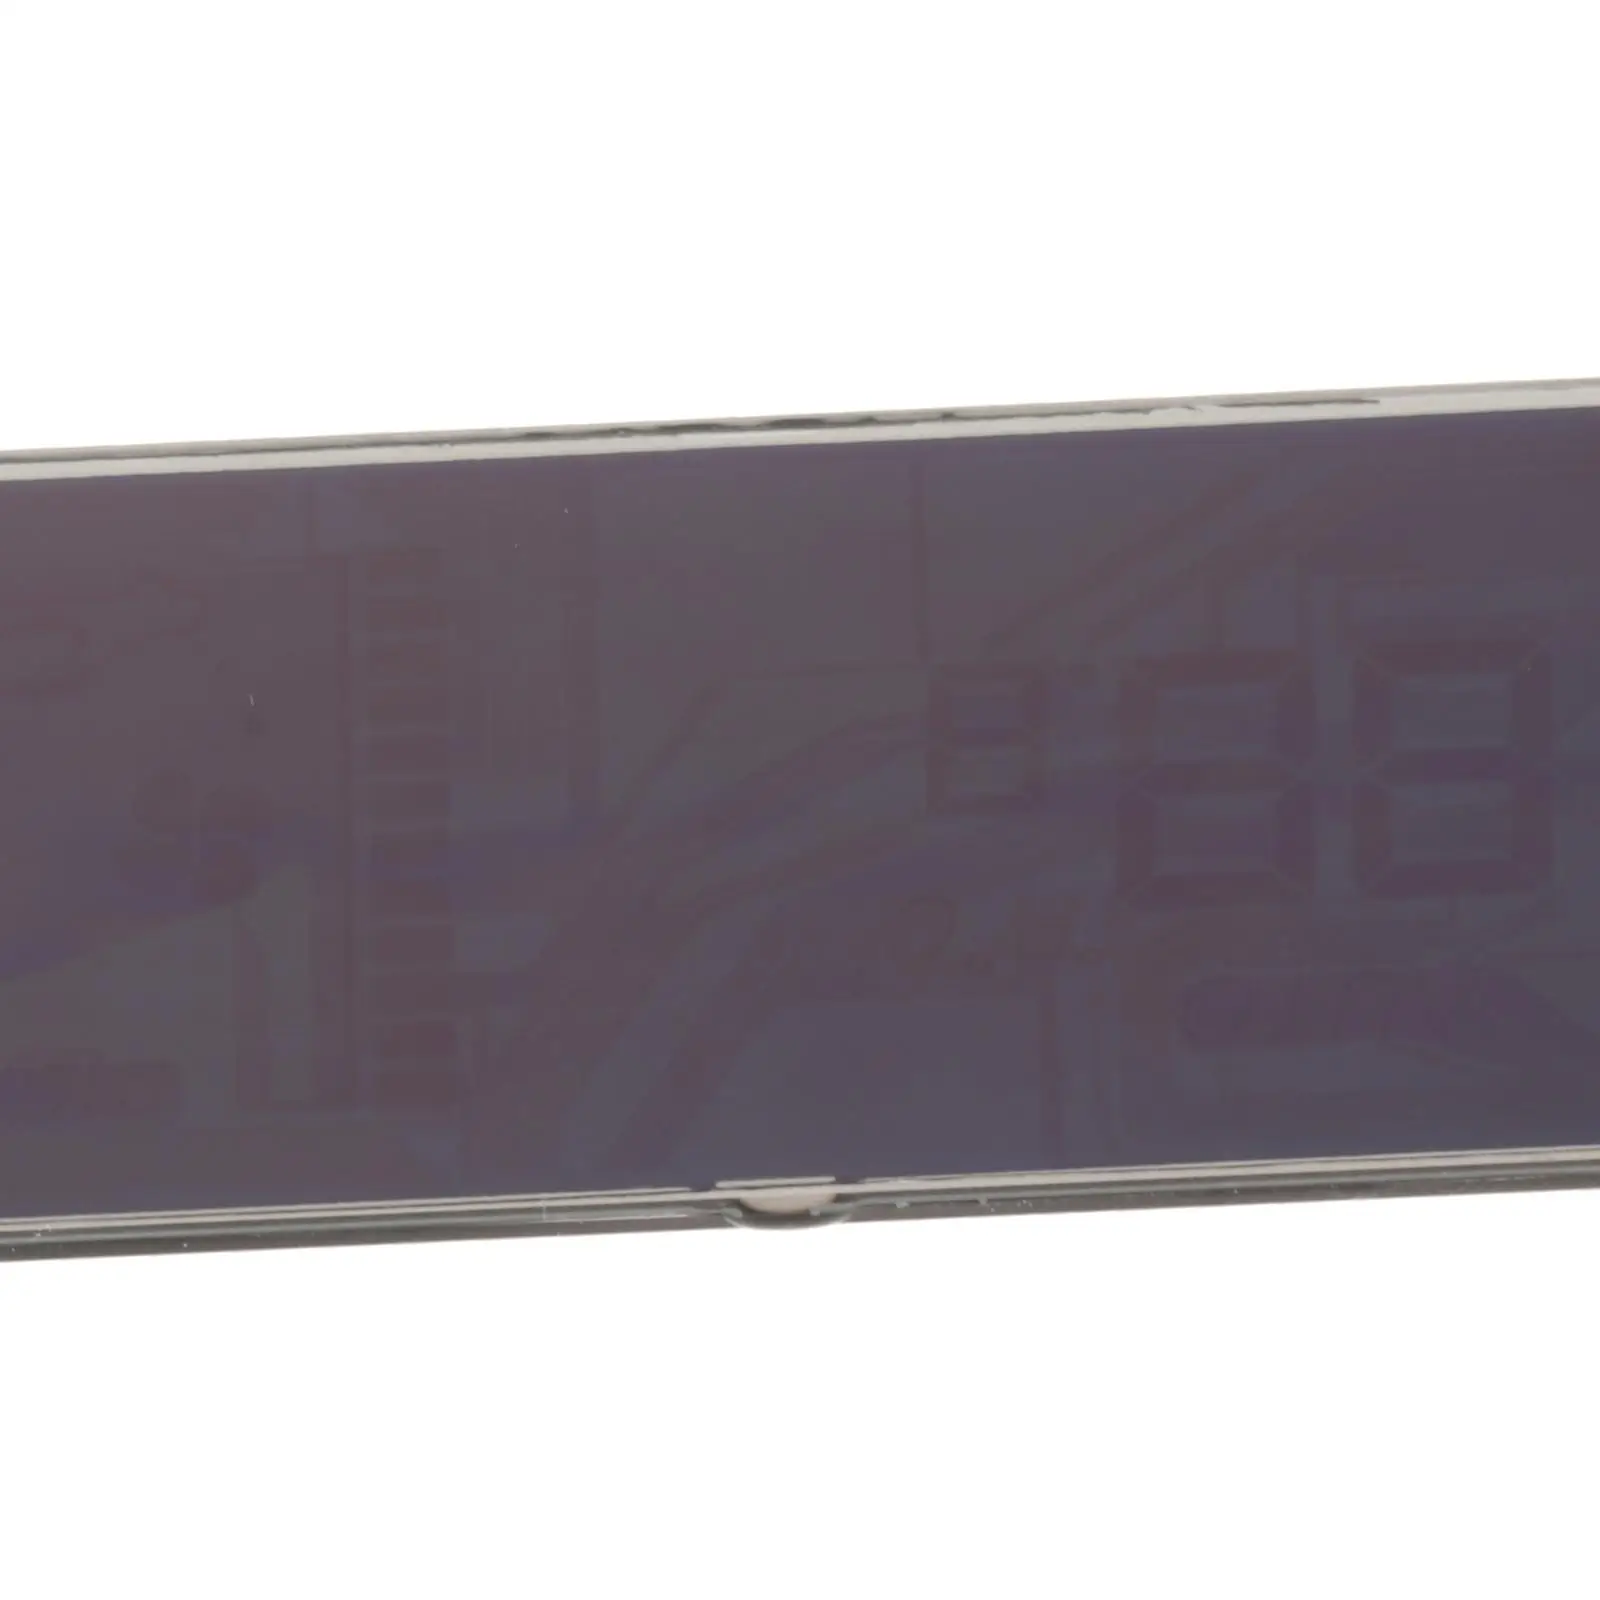 LCD Screen Repl ement Display Fits for 911 9997-2006 ,Ruf 2002 ,  Heater Temperature Unit Ruf 3400 S